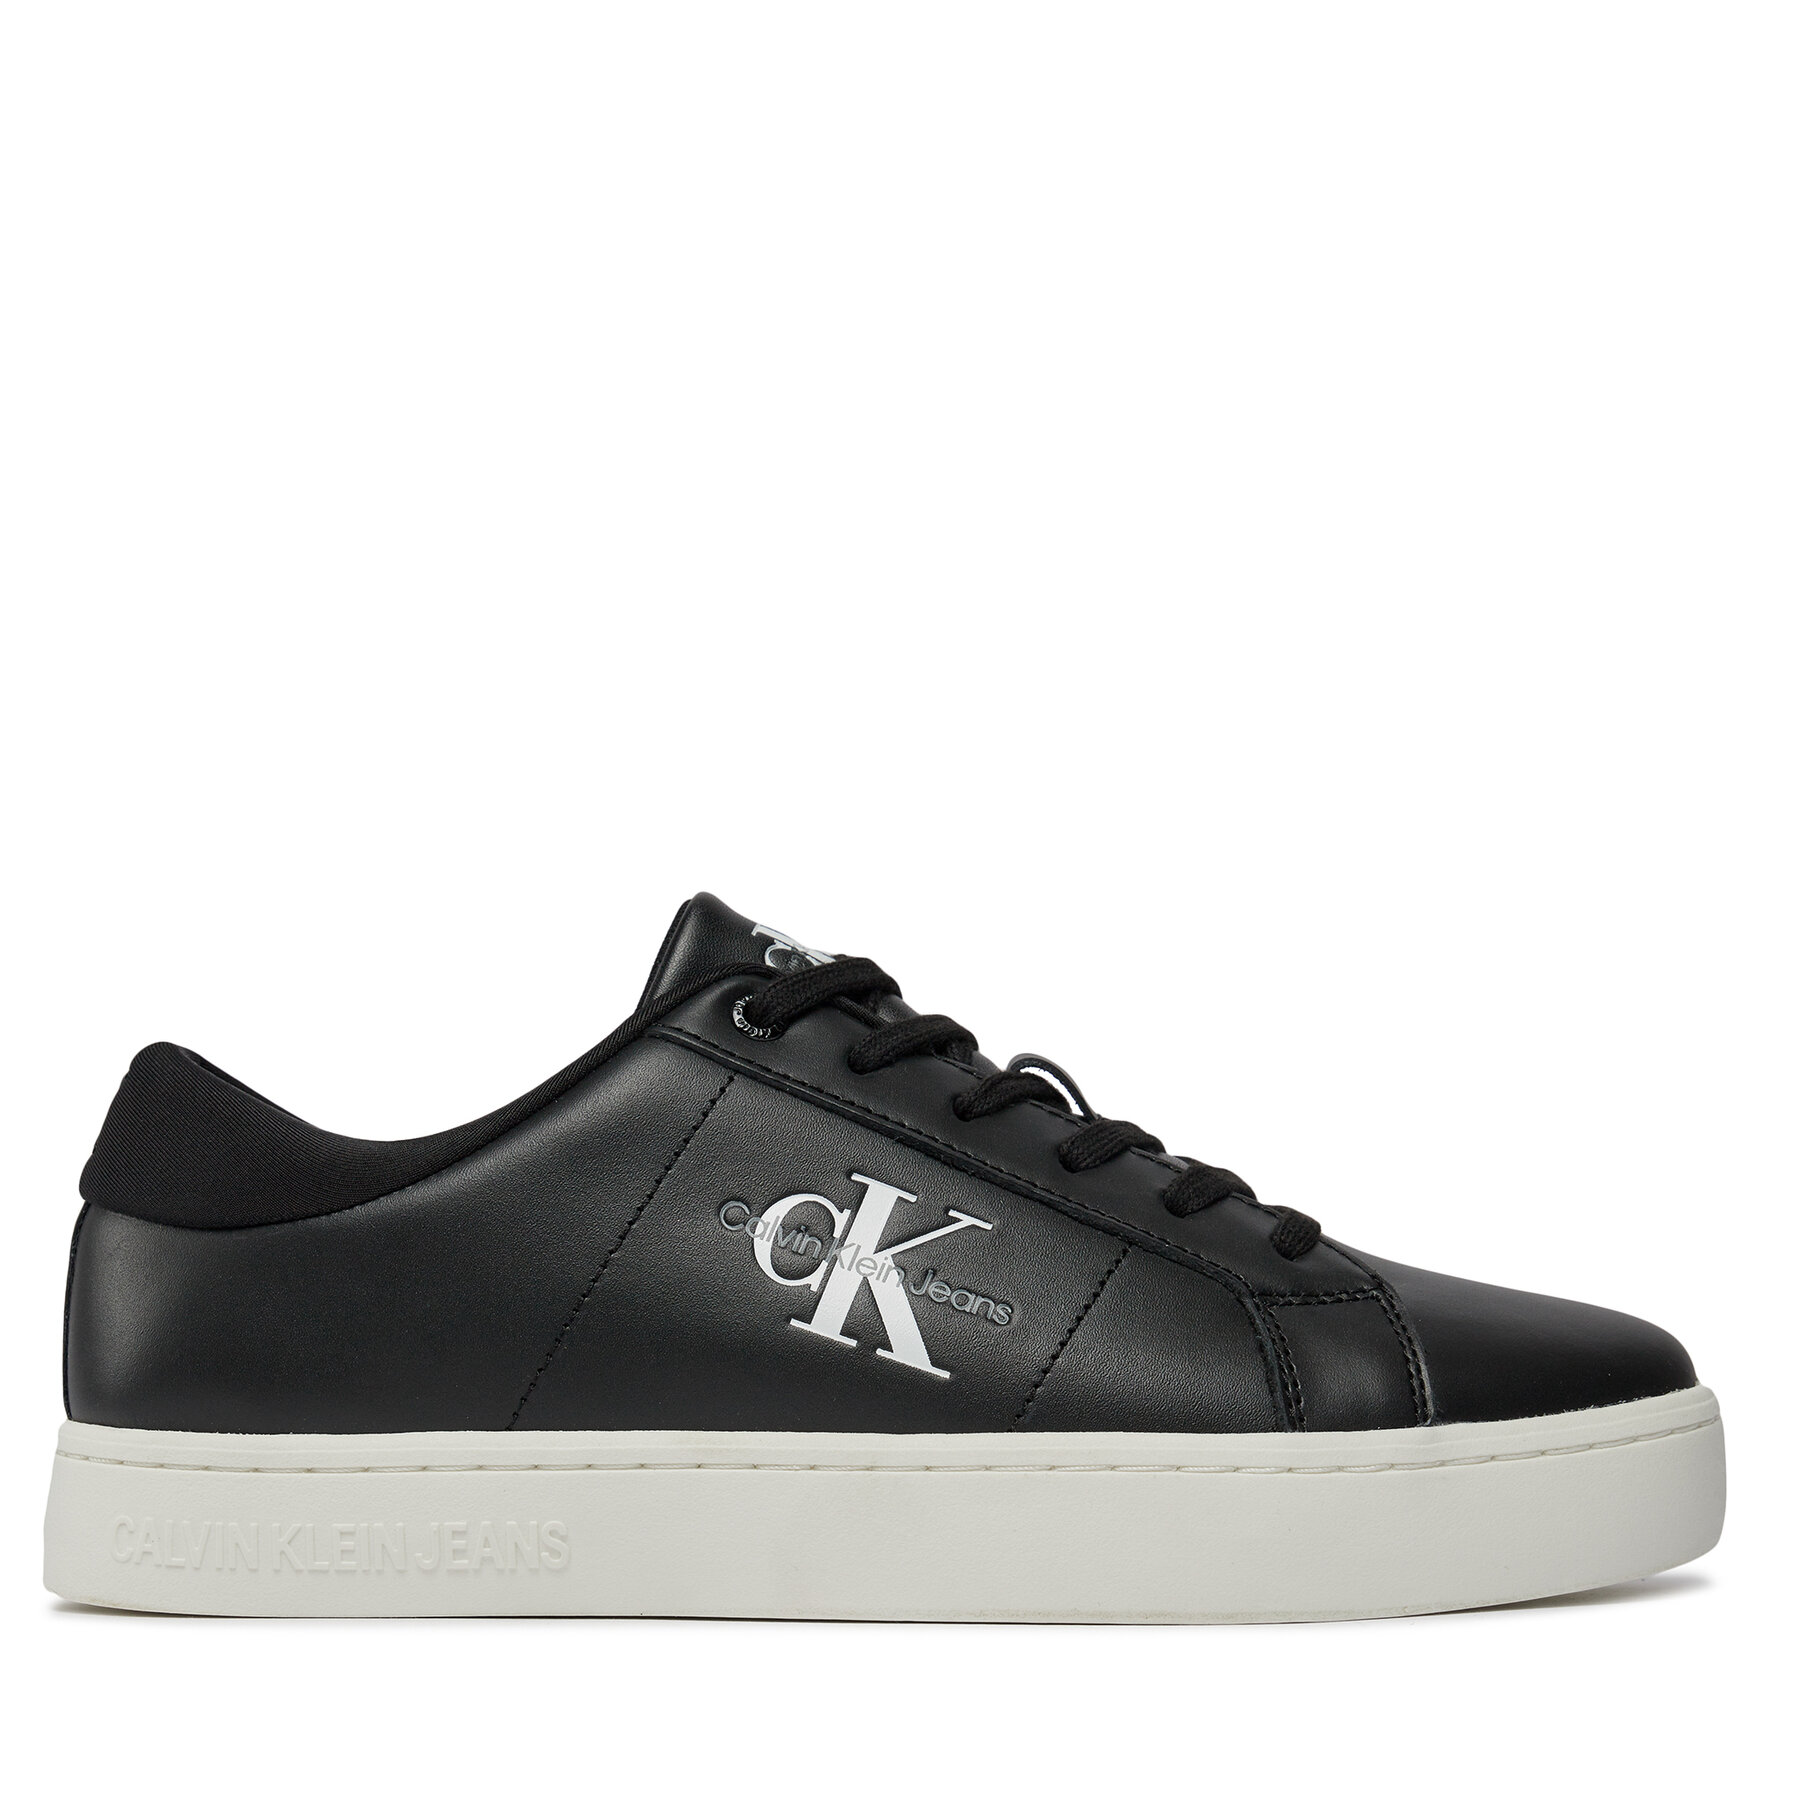 Sneakers Calvin Klein Jeans Classic Cupsole Low Laceup Lth YM0YM00864 Black/Bright White 0GM von Calvin Klein Jeans